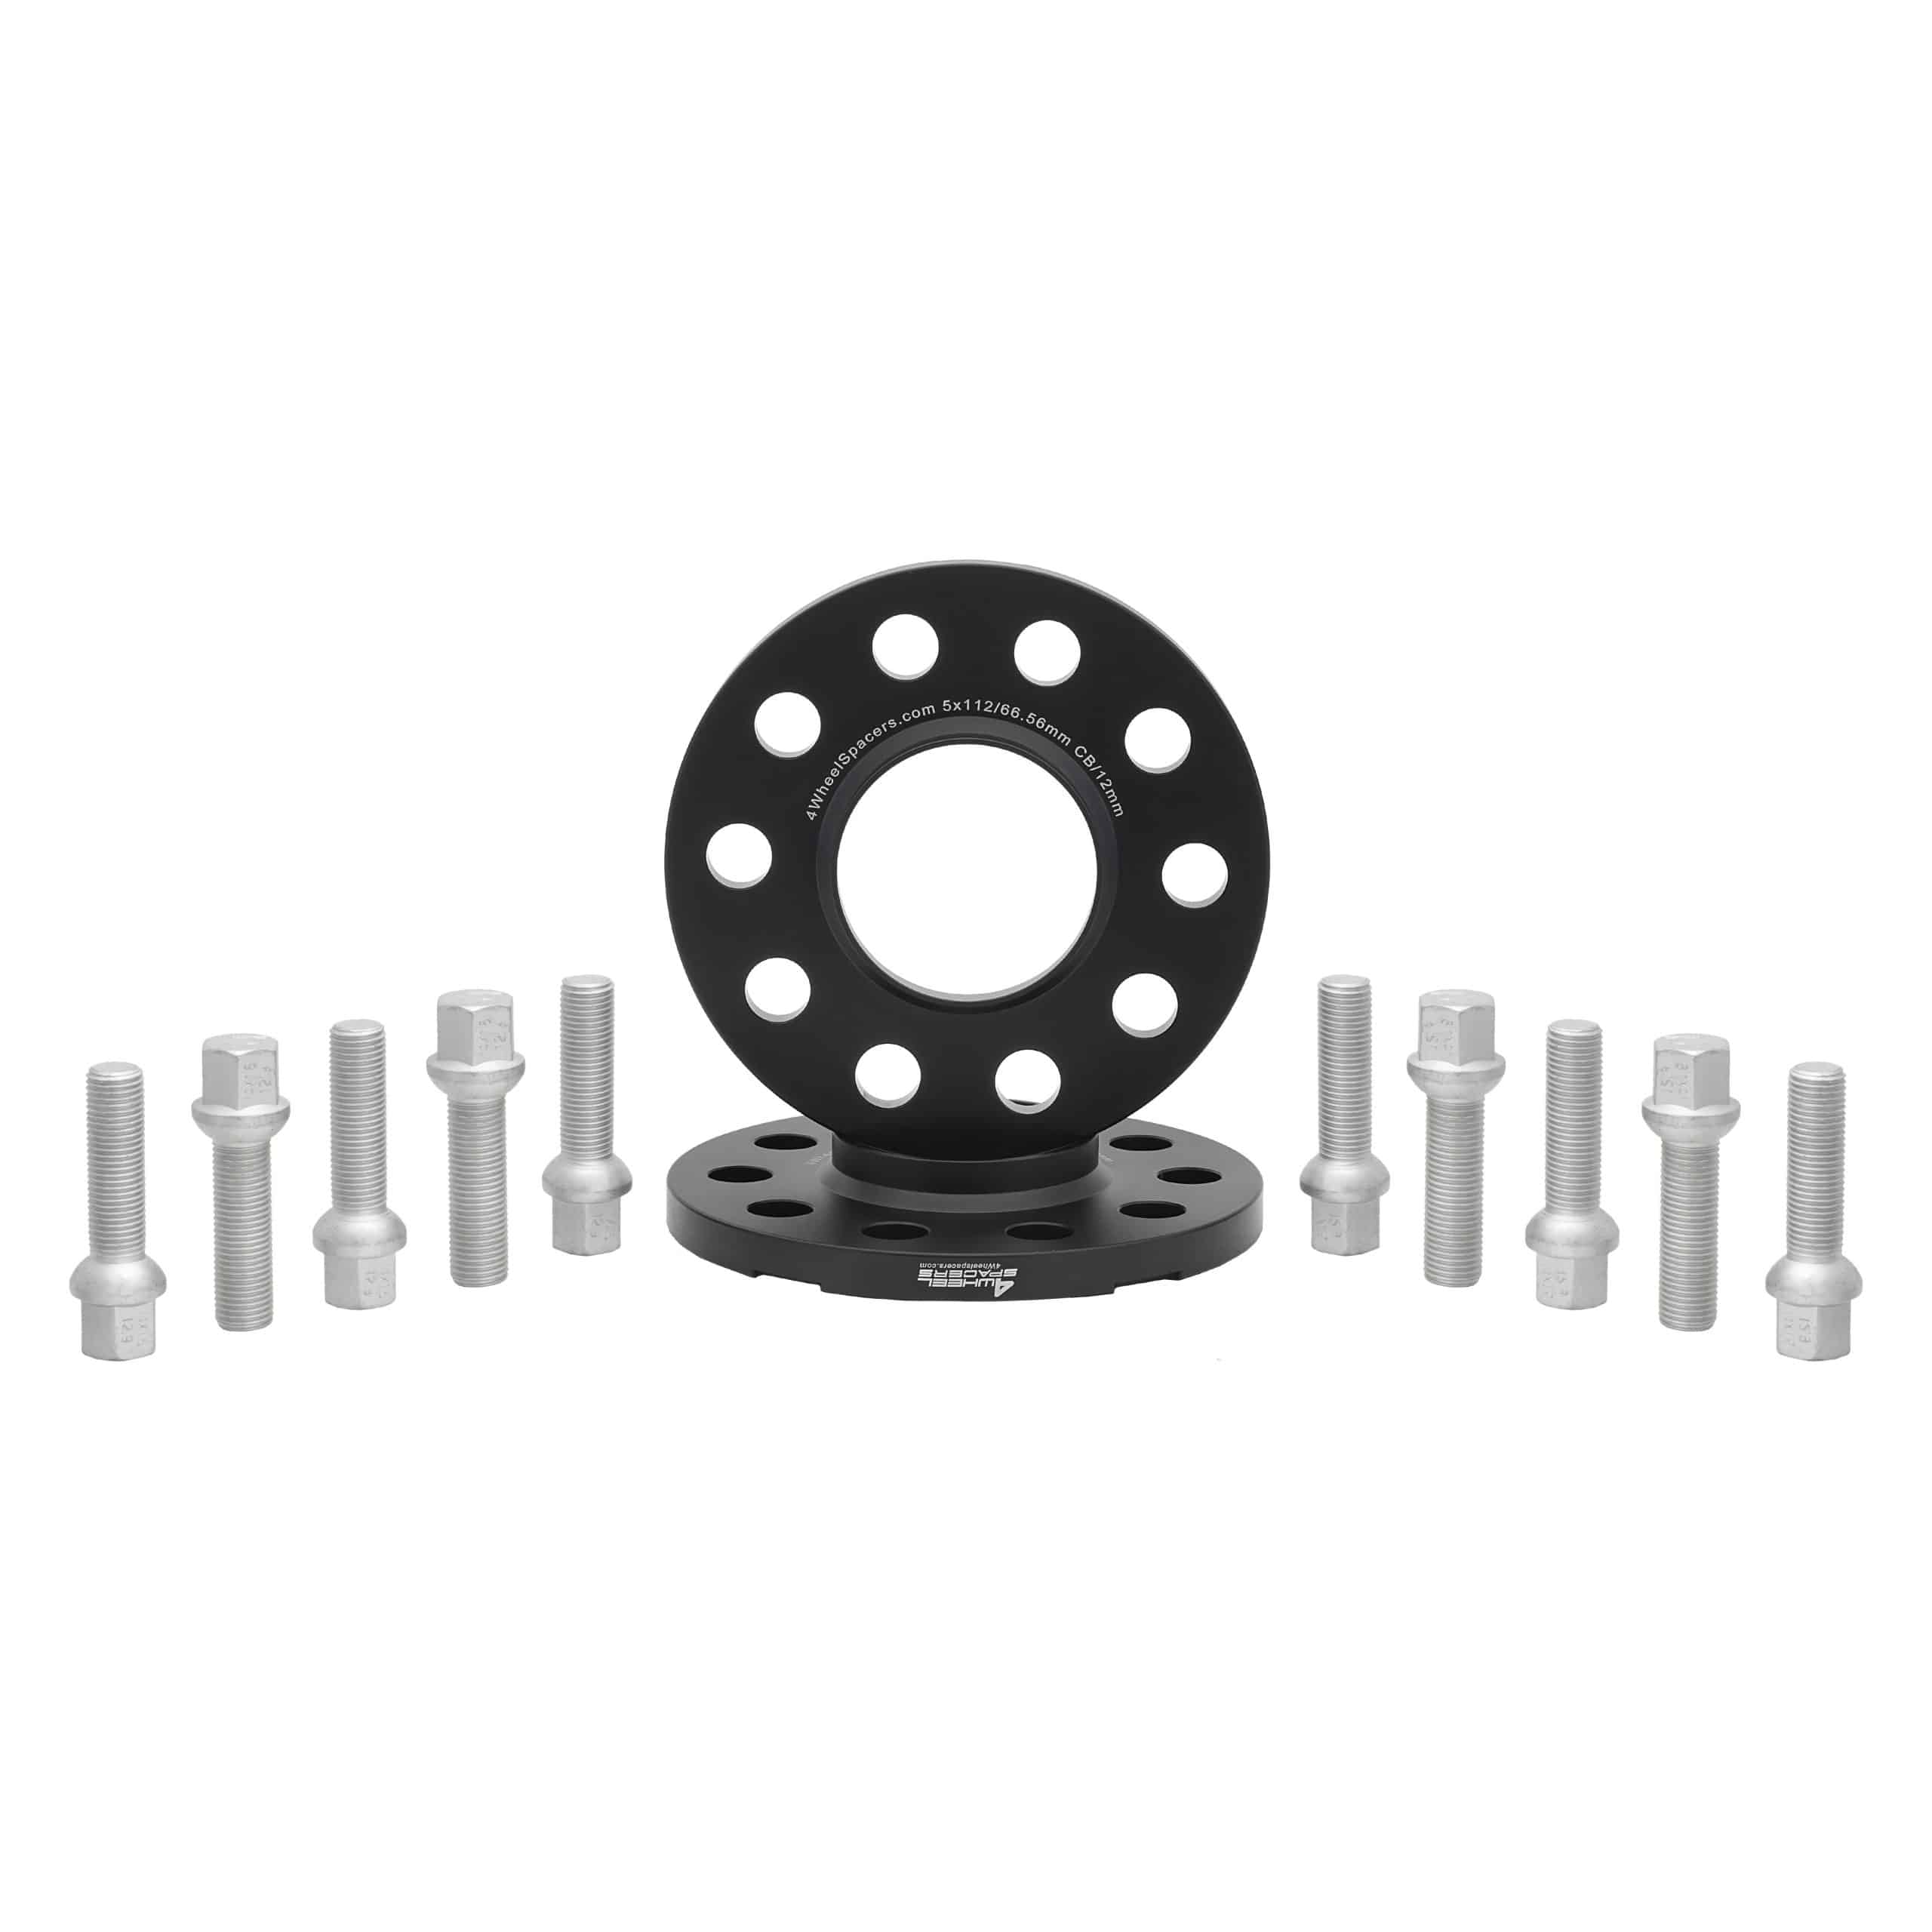 Audi 12mm Hub-Centric Wheel Spacers With Ball Seat Bolt Kit, 4WheelSpacers.com